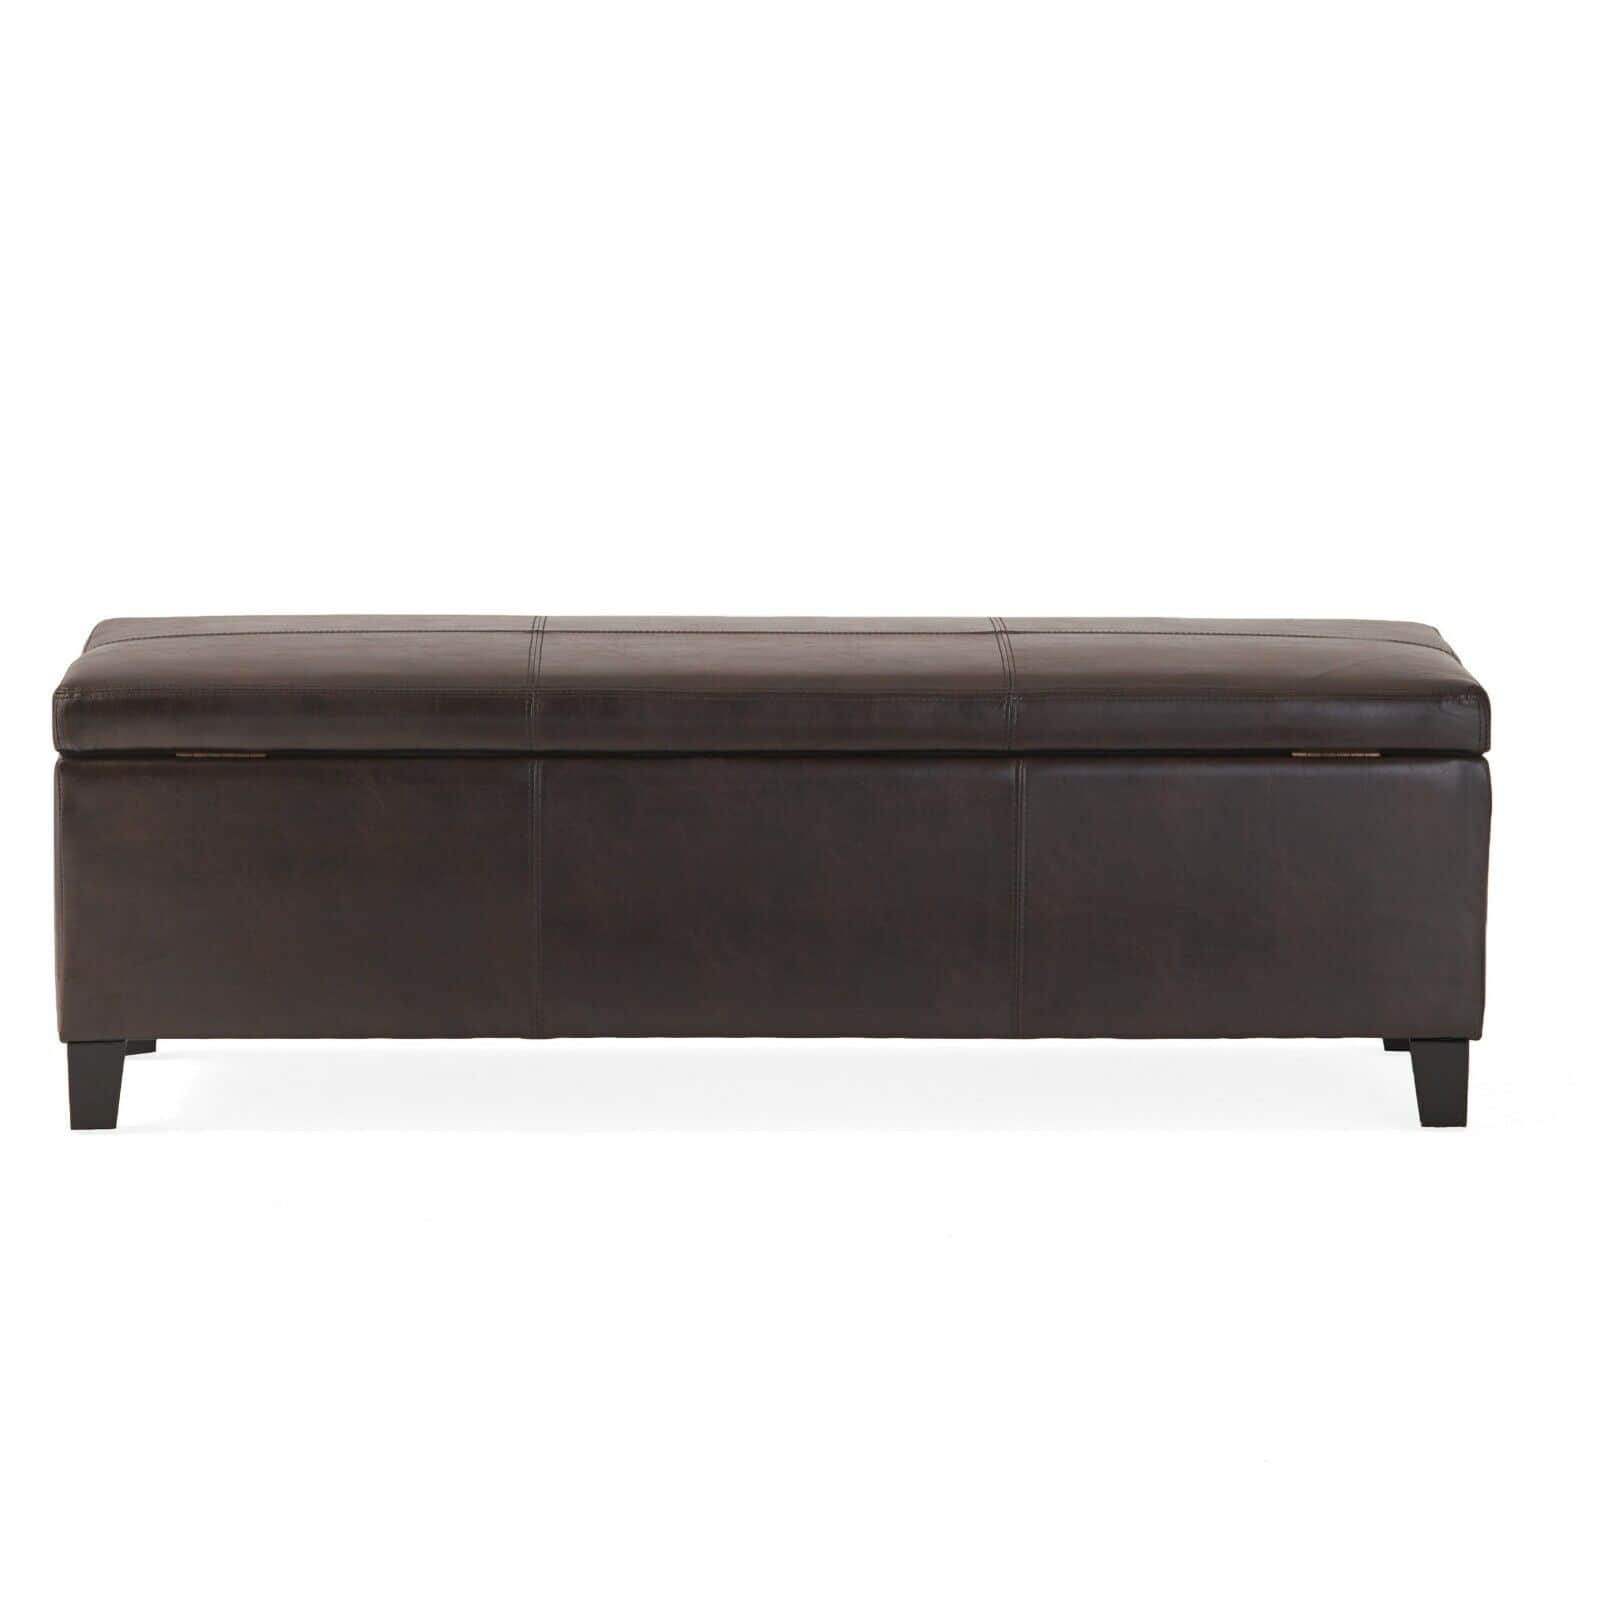 A brown leather storage bench on a white background.